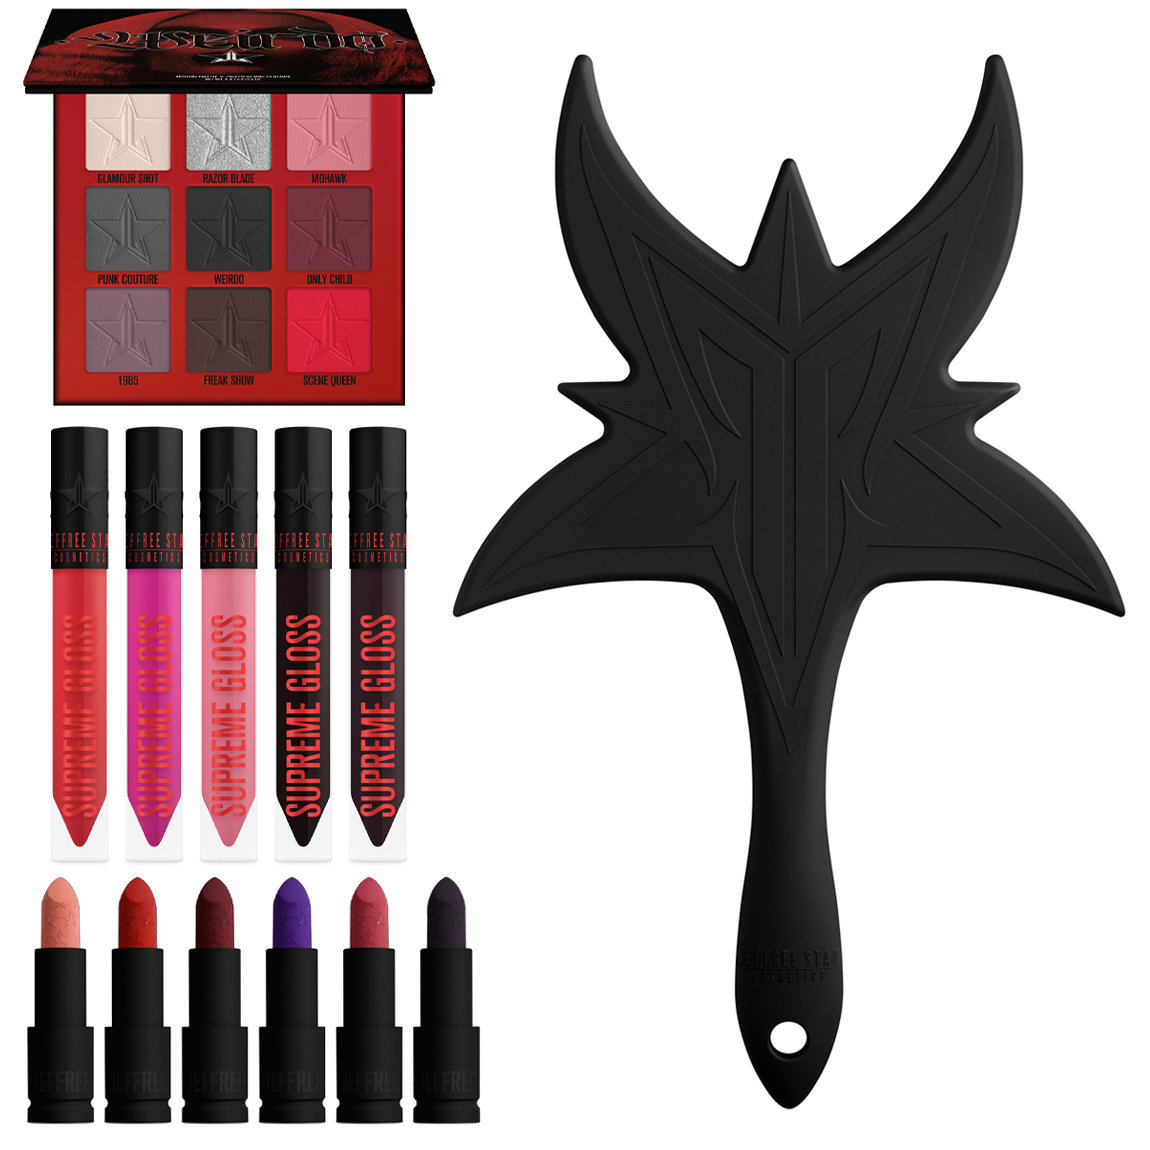 Jeffree Star Cosmetics Weirdo Collection Bundle Black Soft Touch Mirror alternative view 1 - product swatch.